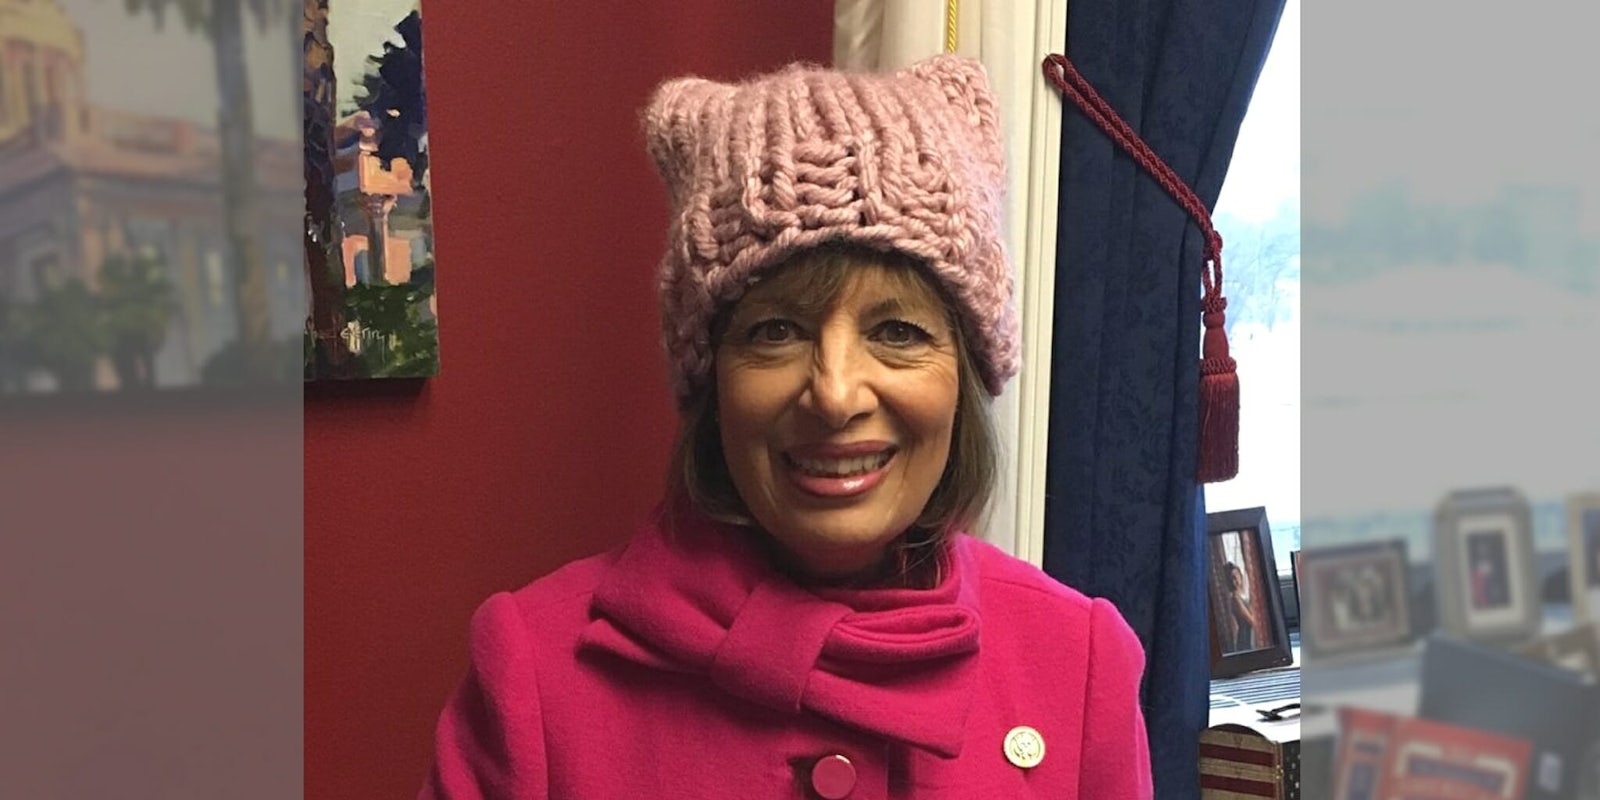 Rep. Jackie Speier from California attending the Women's March in 2017.